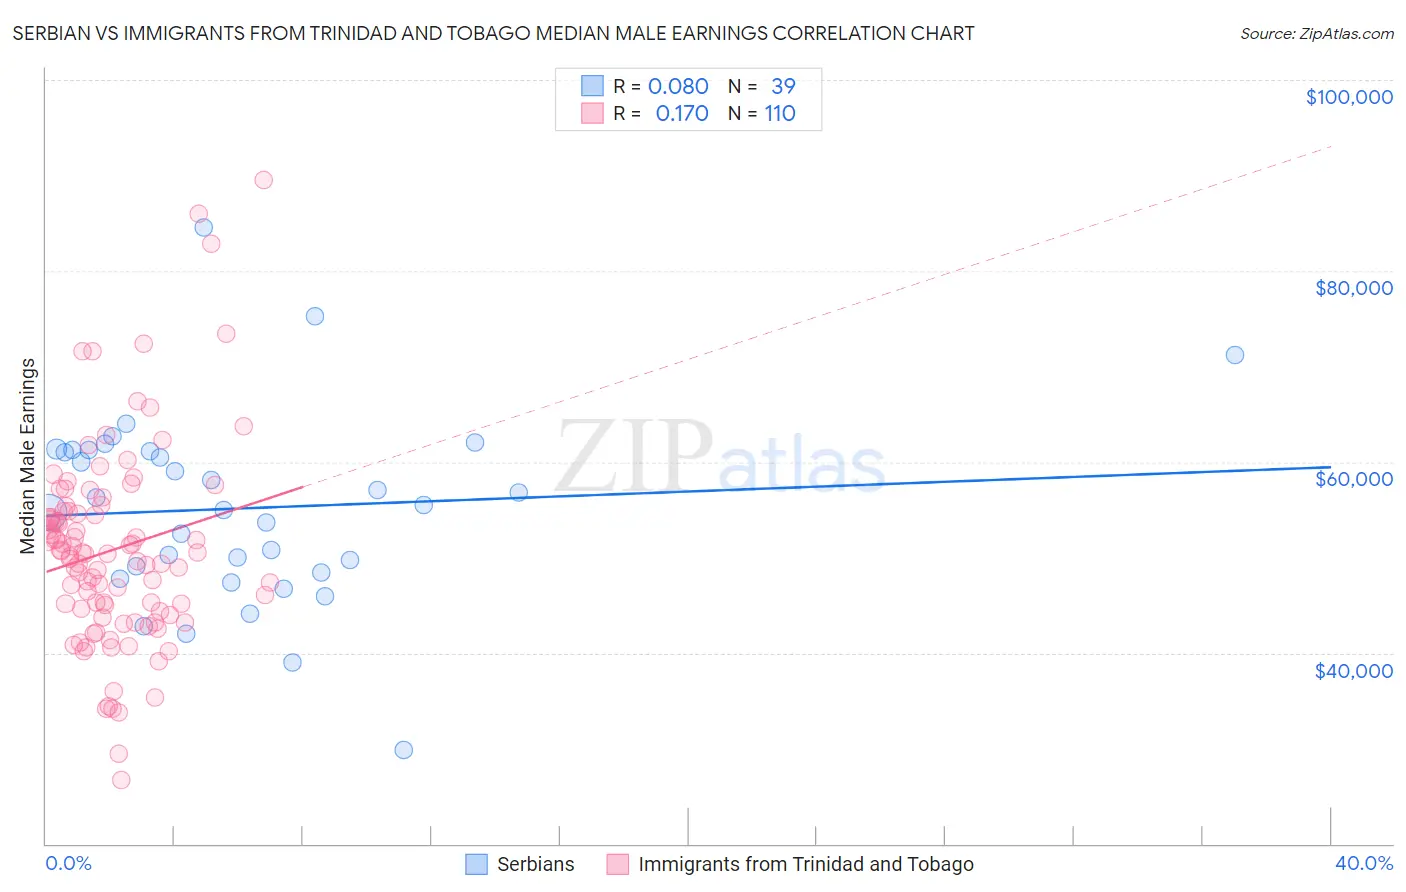 Serbian vs Immigrants from Trinidad and Tobago Median Male Earnings